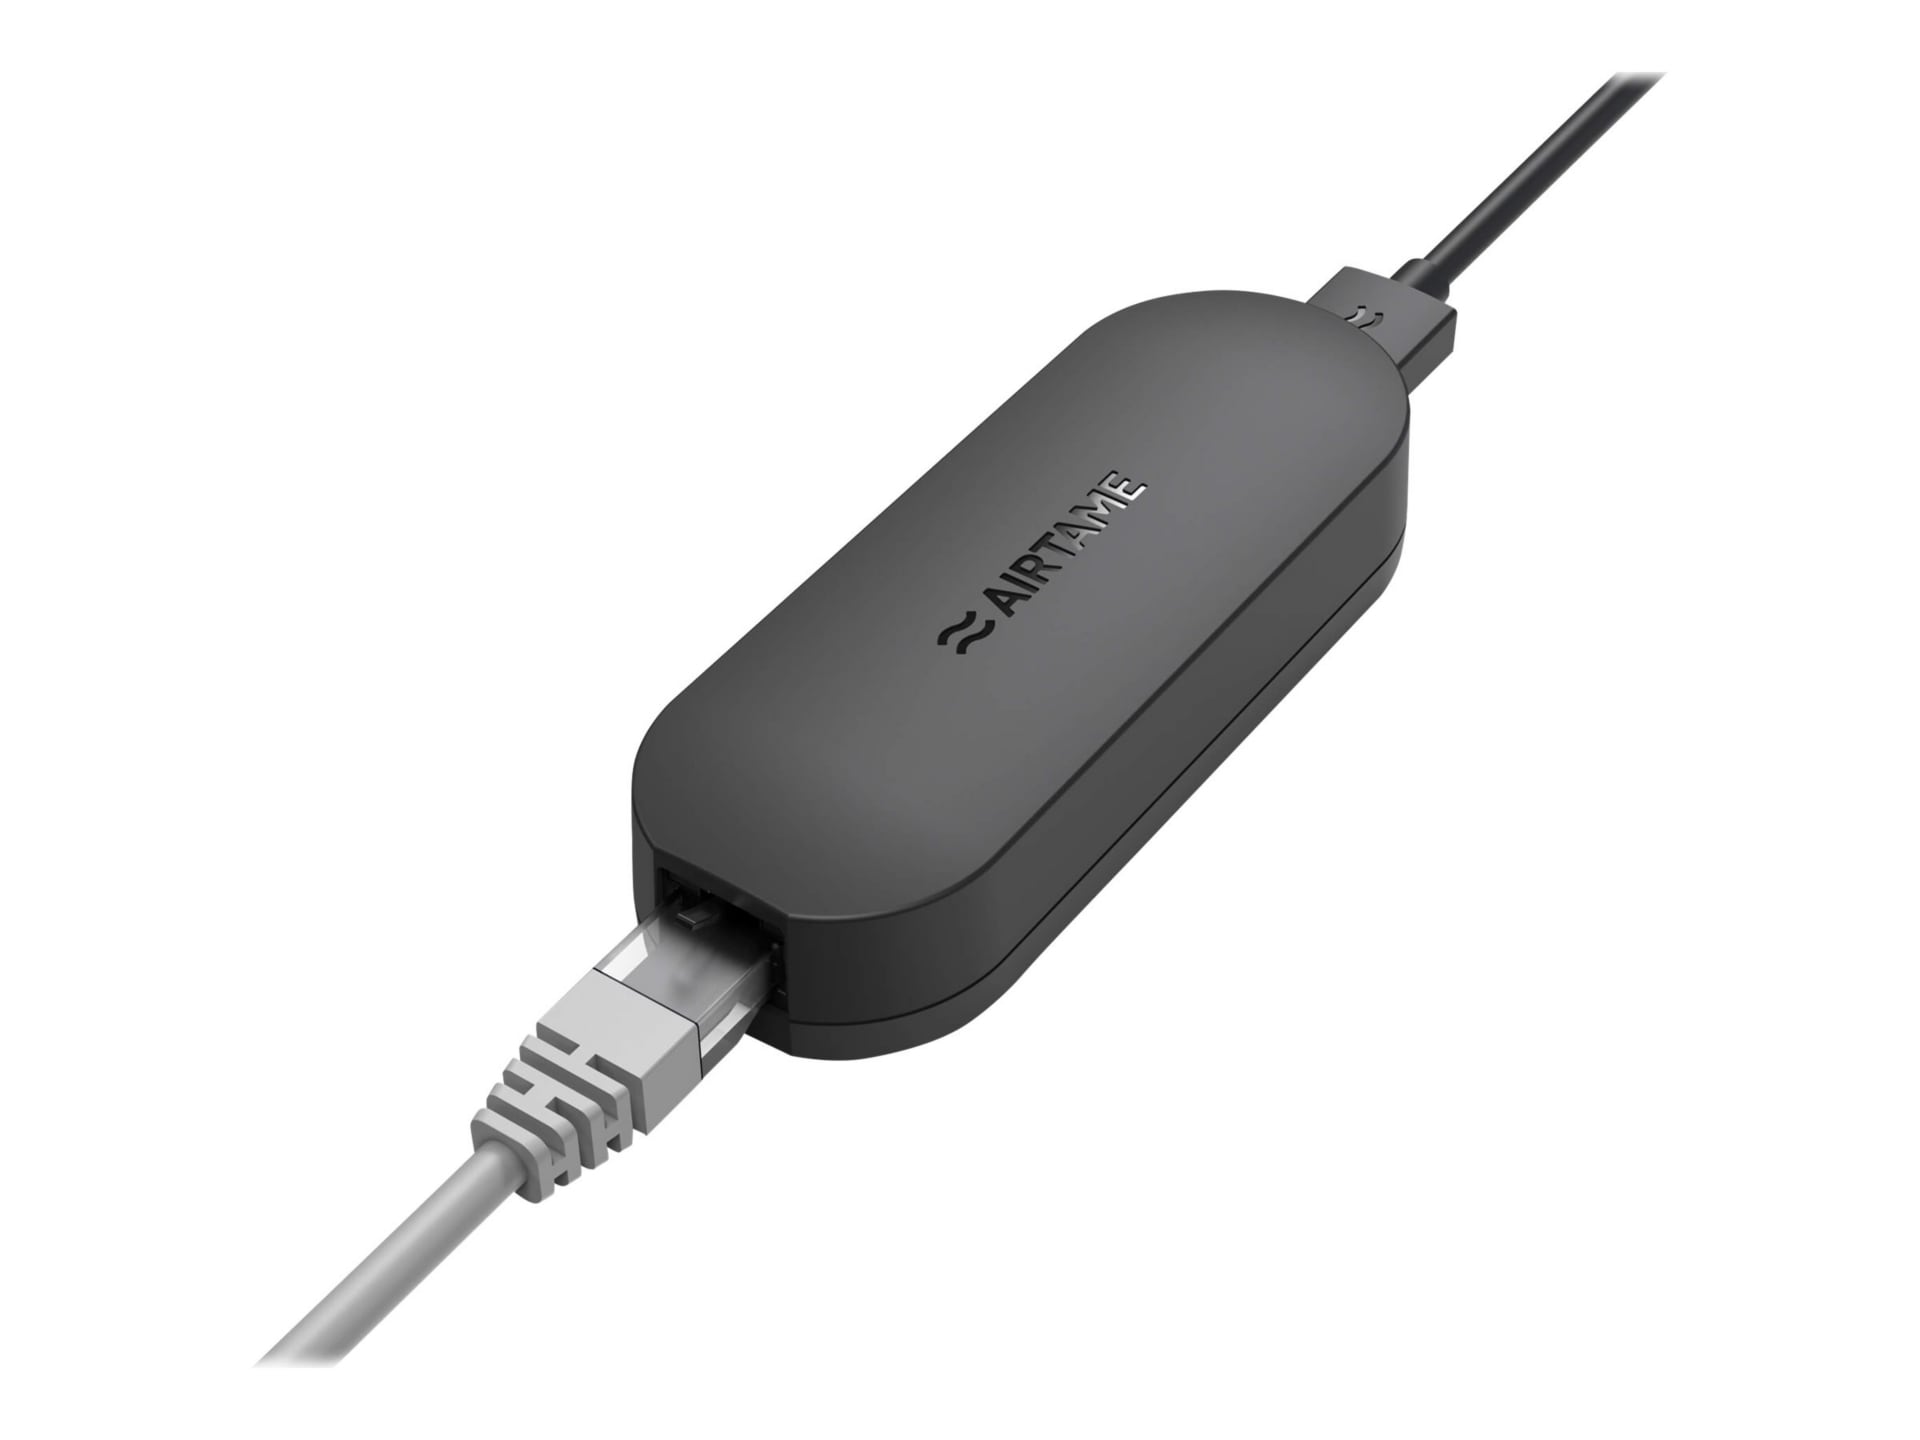 Airtame Wired Ethernet PoE Adapter